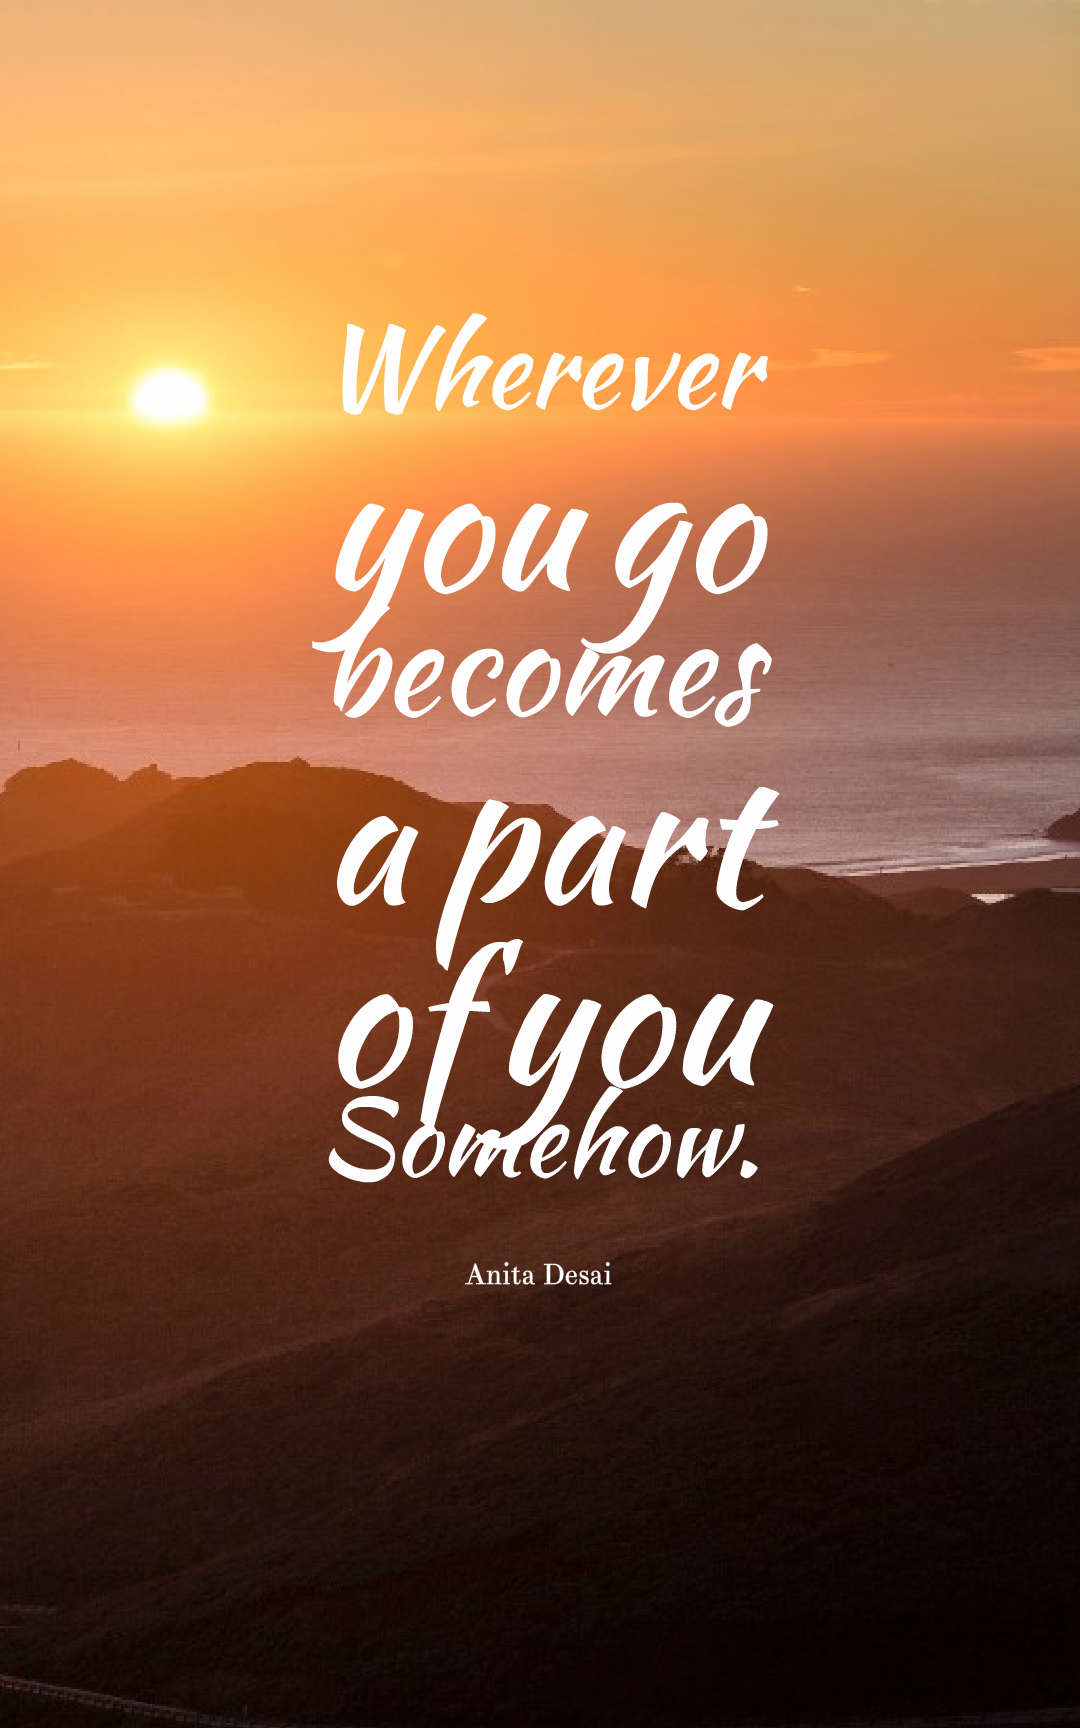 72 Inspirational Travel Quotes - Short Travel Quotes With Images